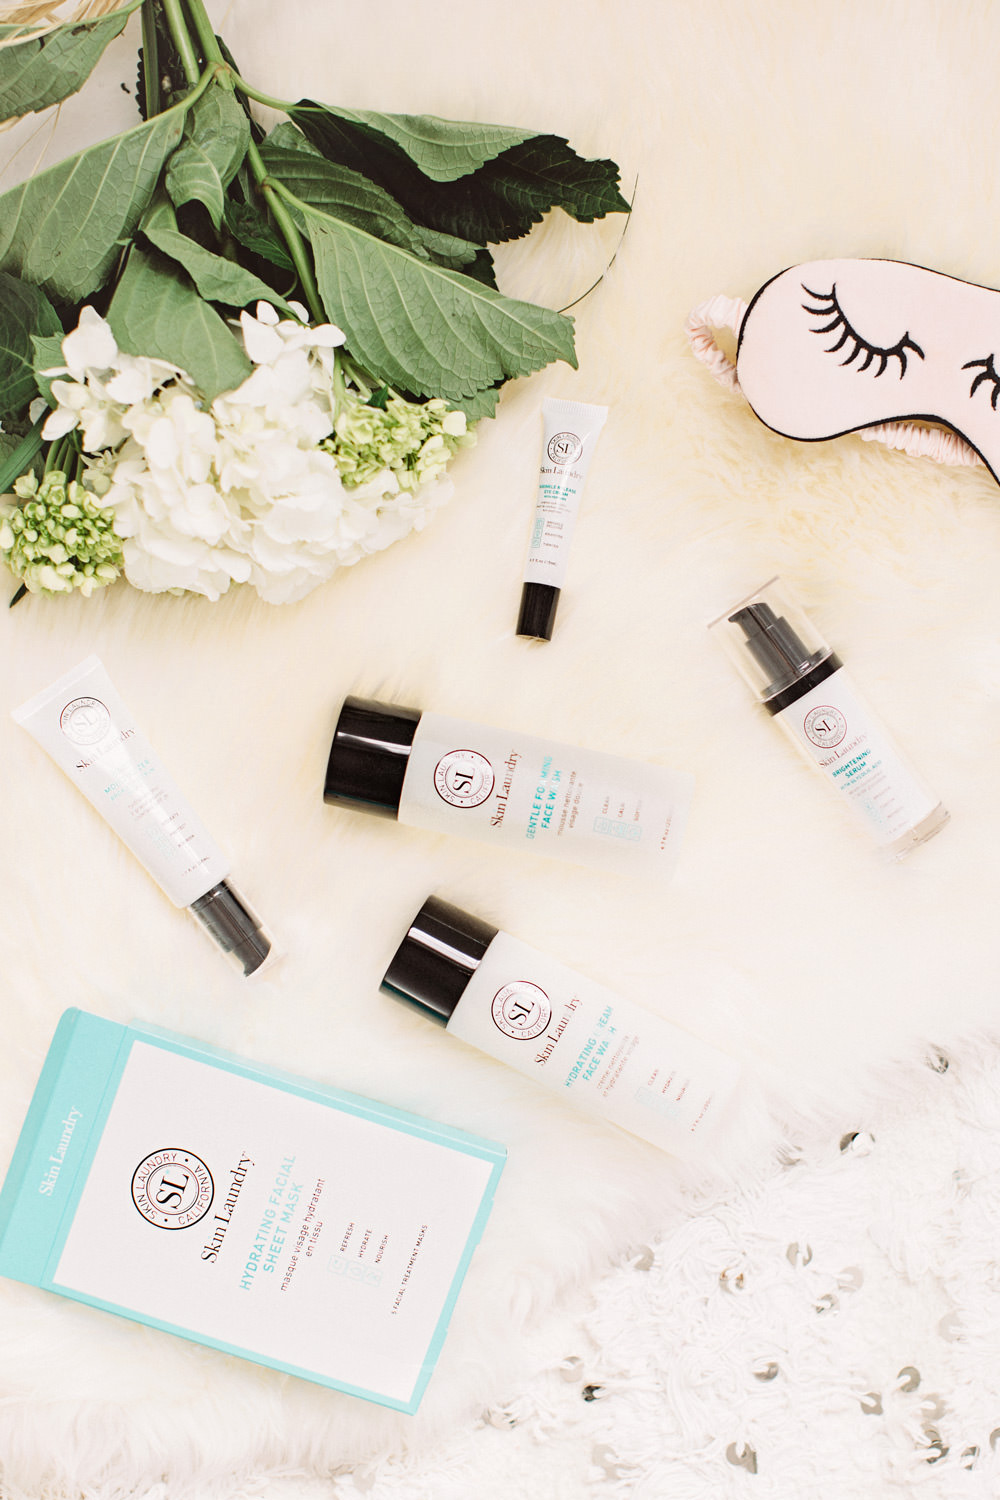 Caitlin Lindquist of Dash of Darling shares her skincare beauty favorites with Skin Laundry from Sephora.